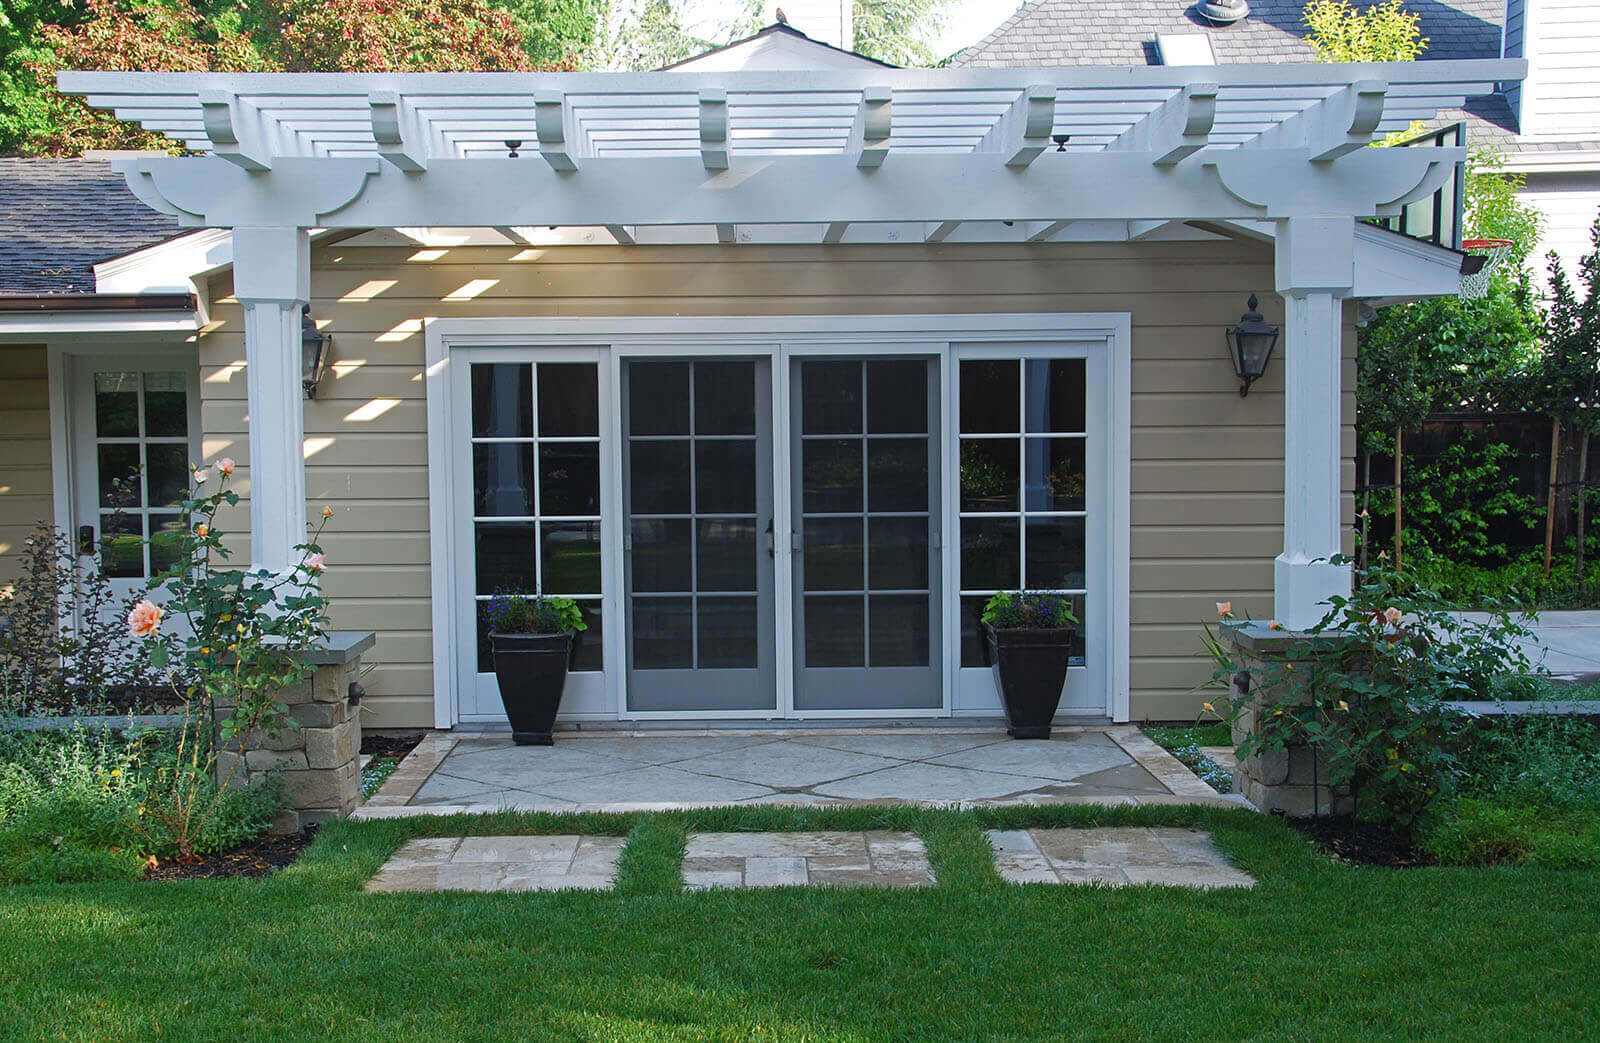 Classis white wood veranda shelters a contemporary concrete and stone patio entry set in a lush lawn with climbing roses